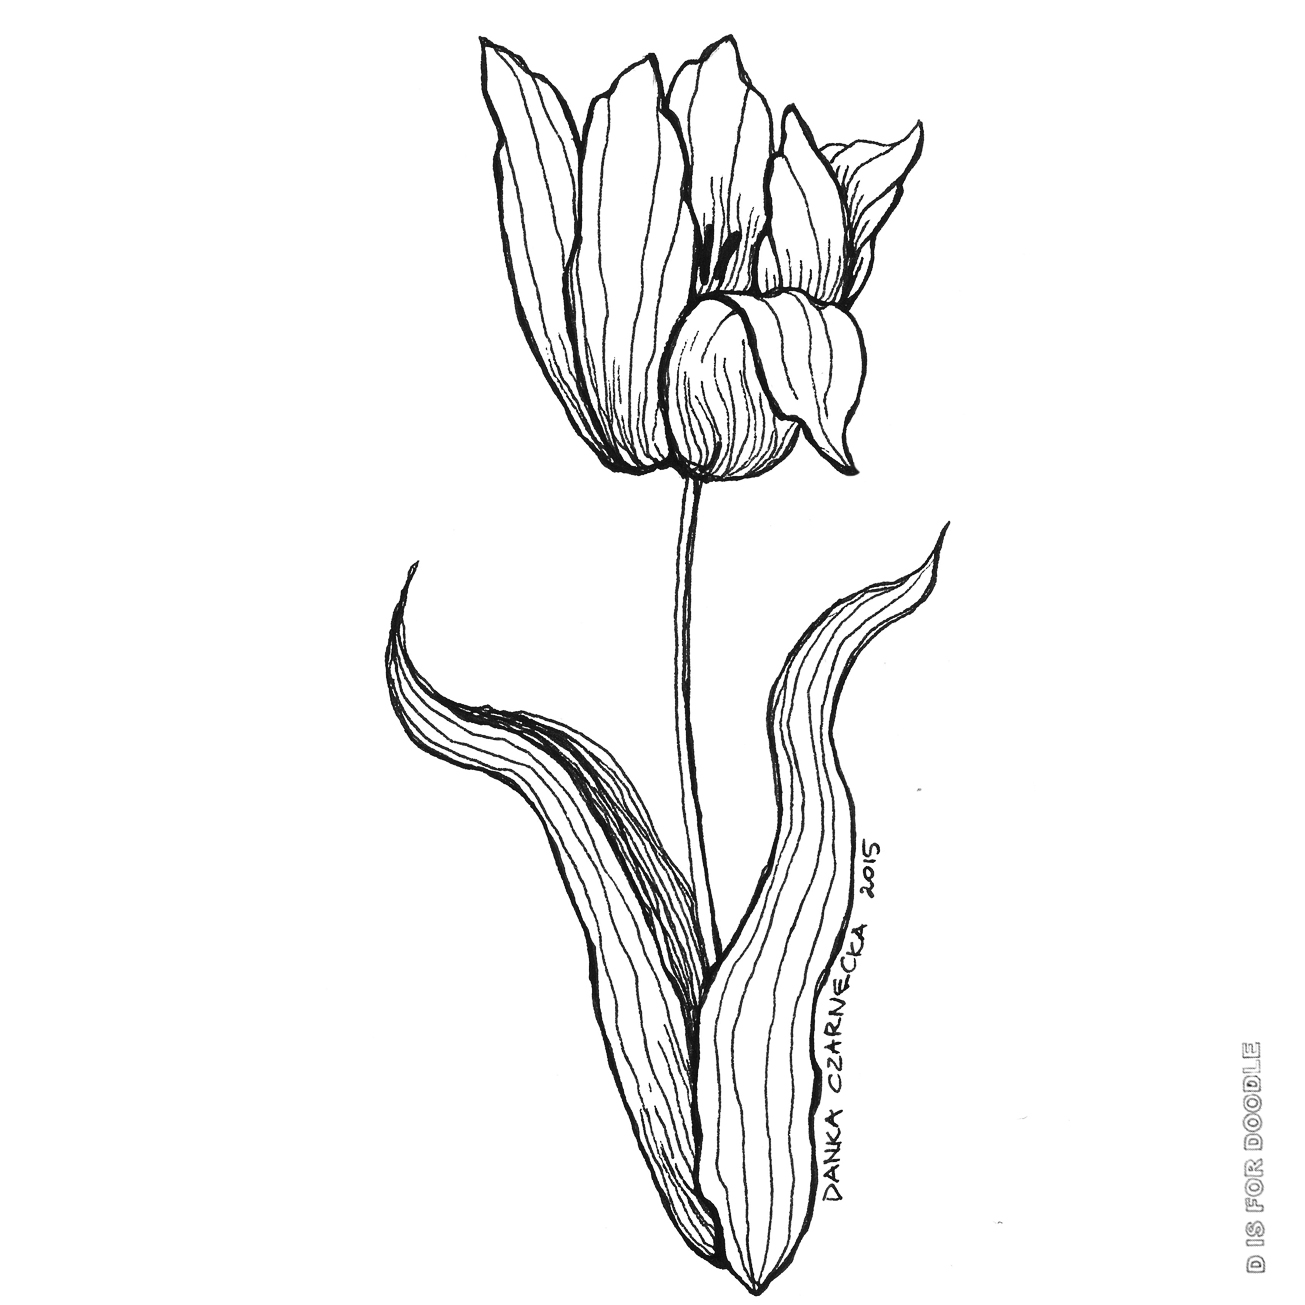 More tulips! | D is for Doodle